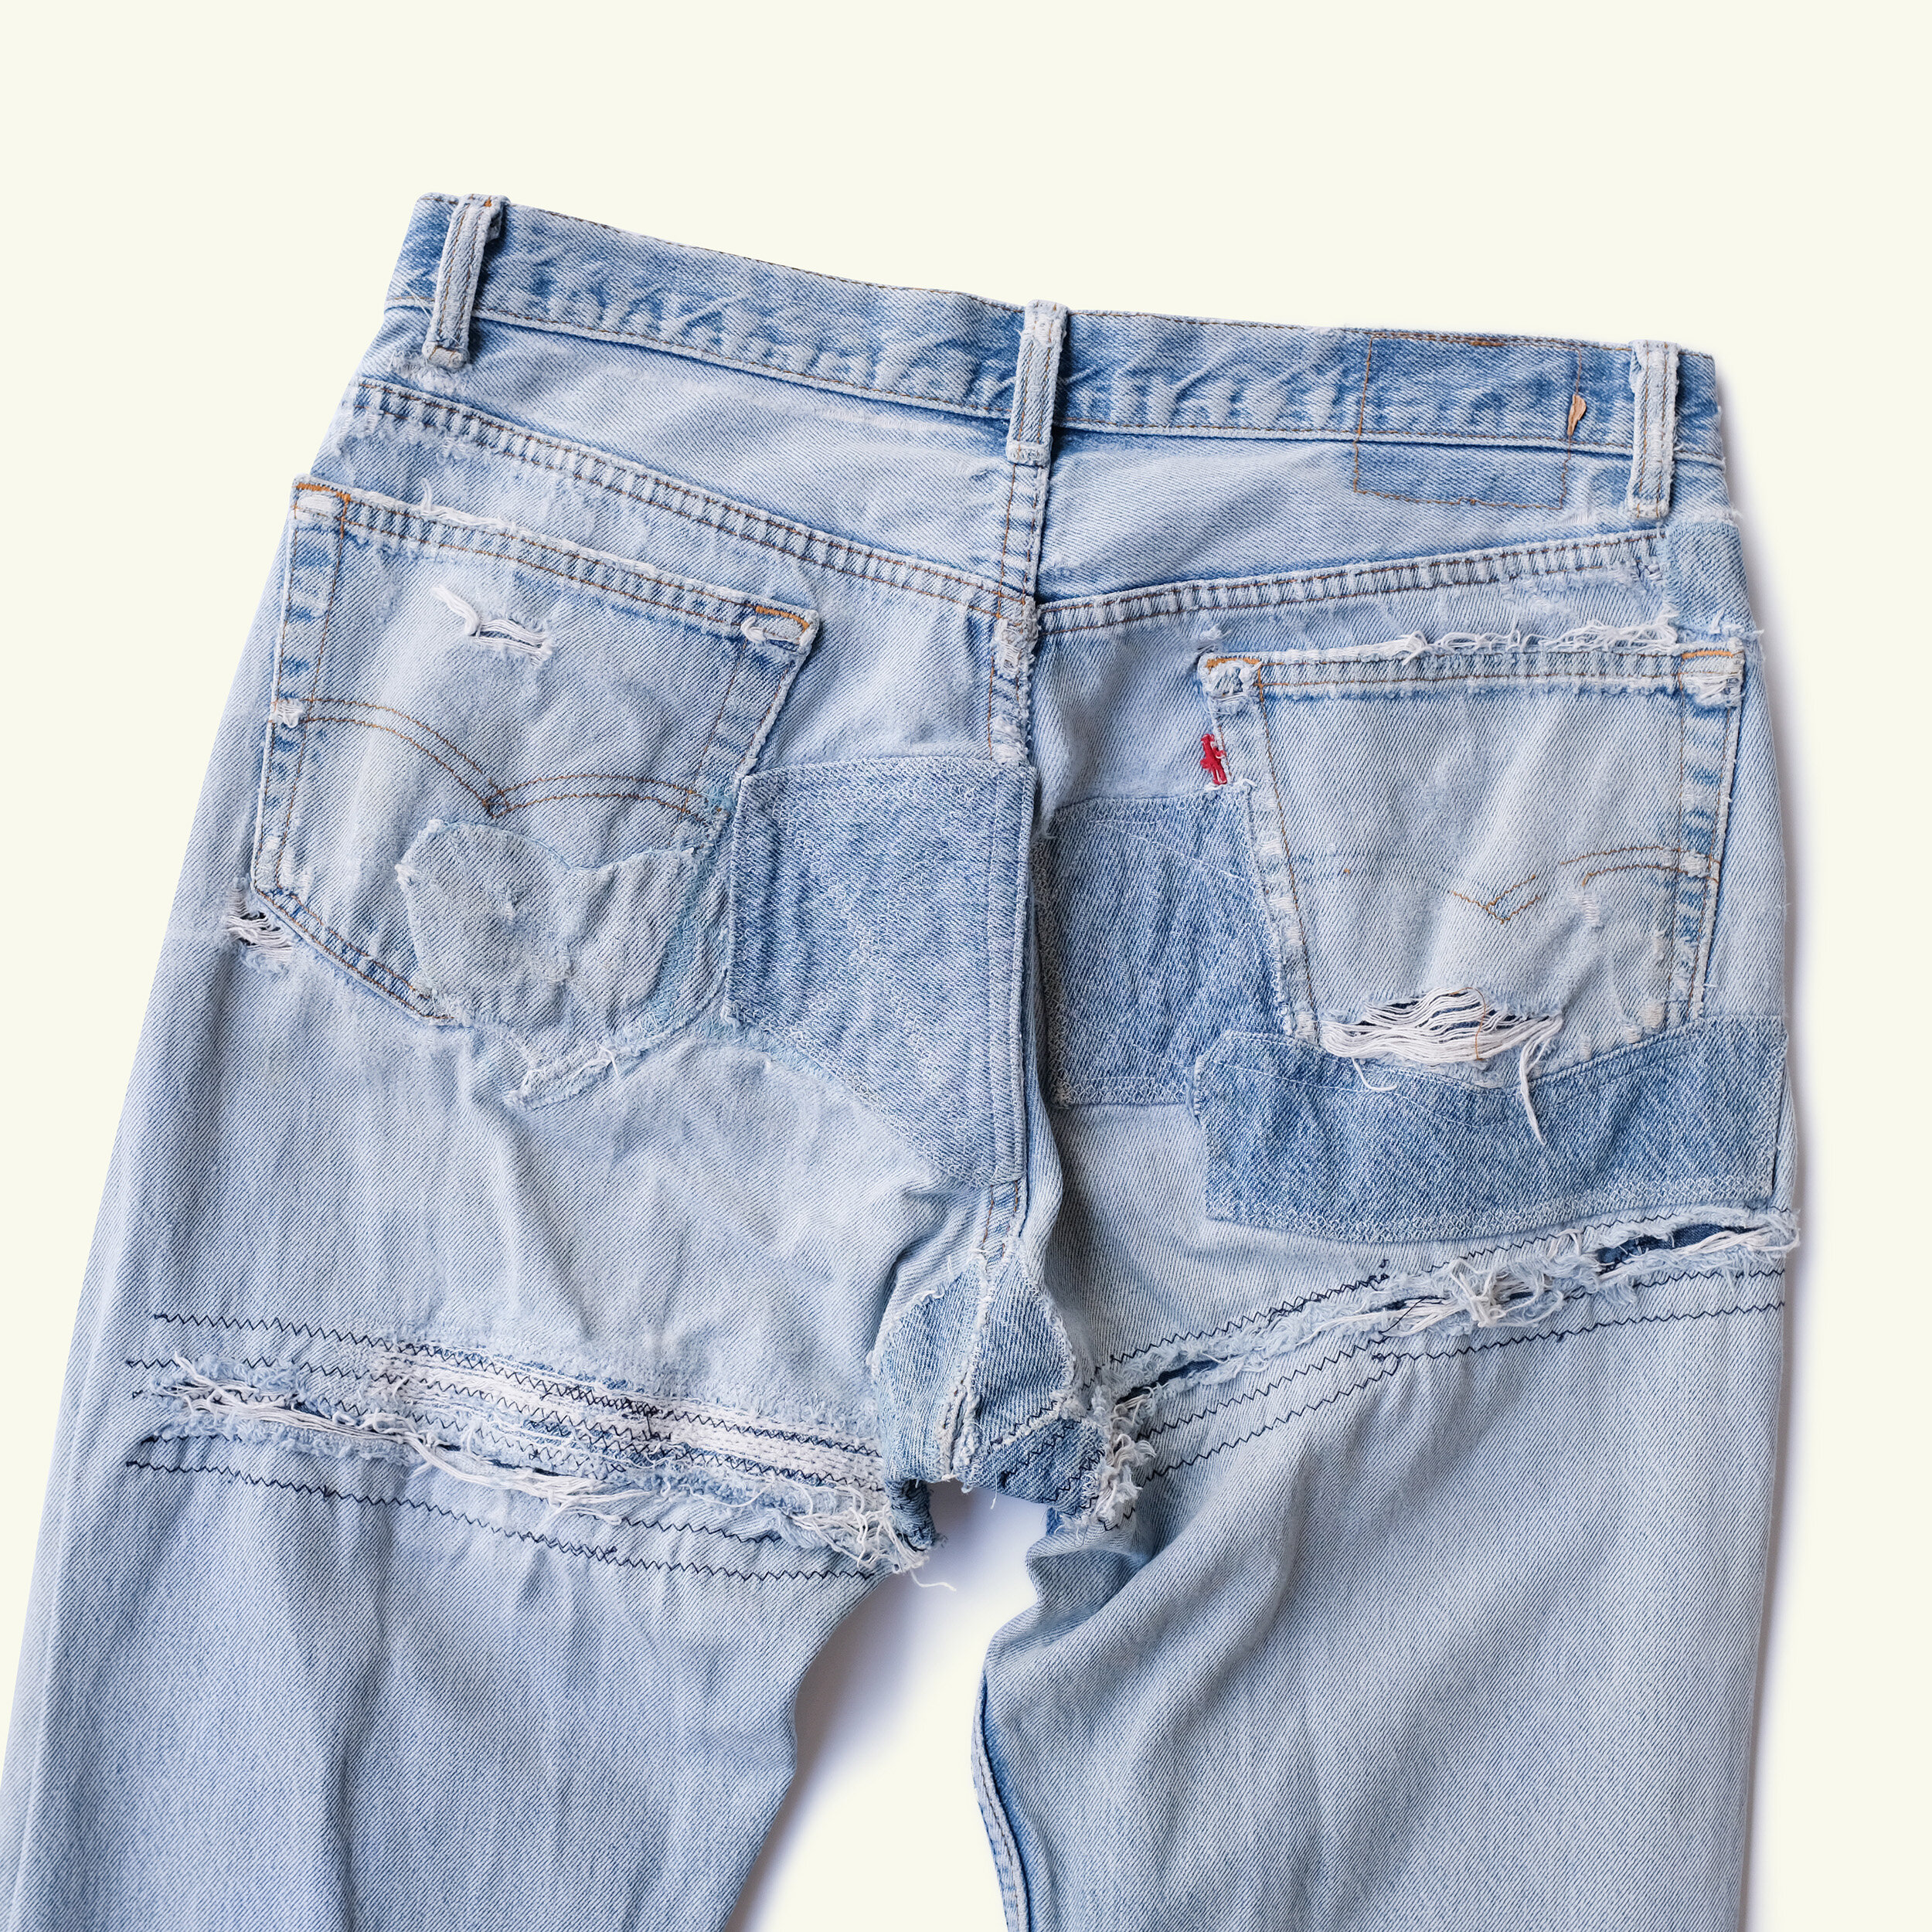 levis 501 ripped jeans